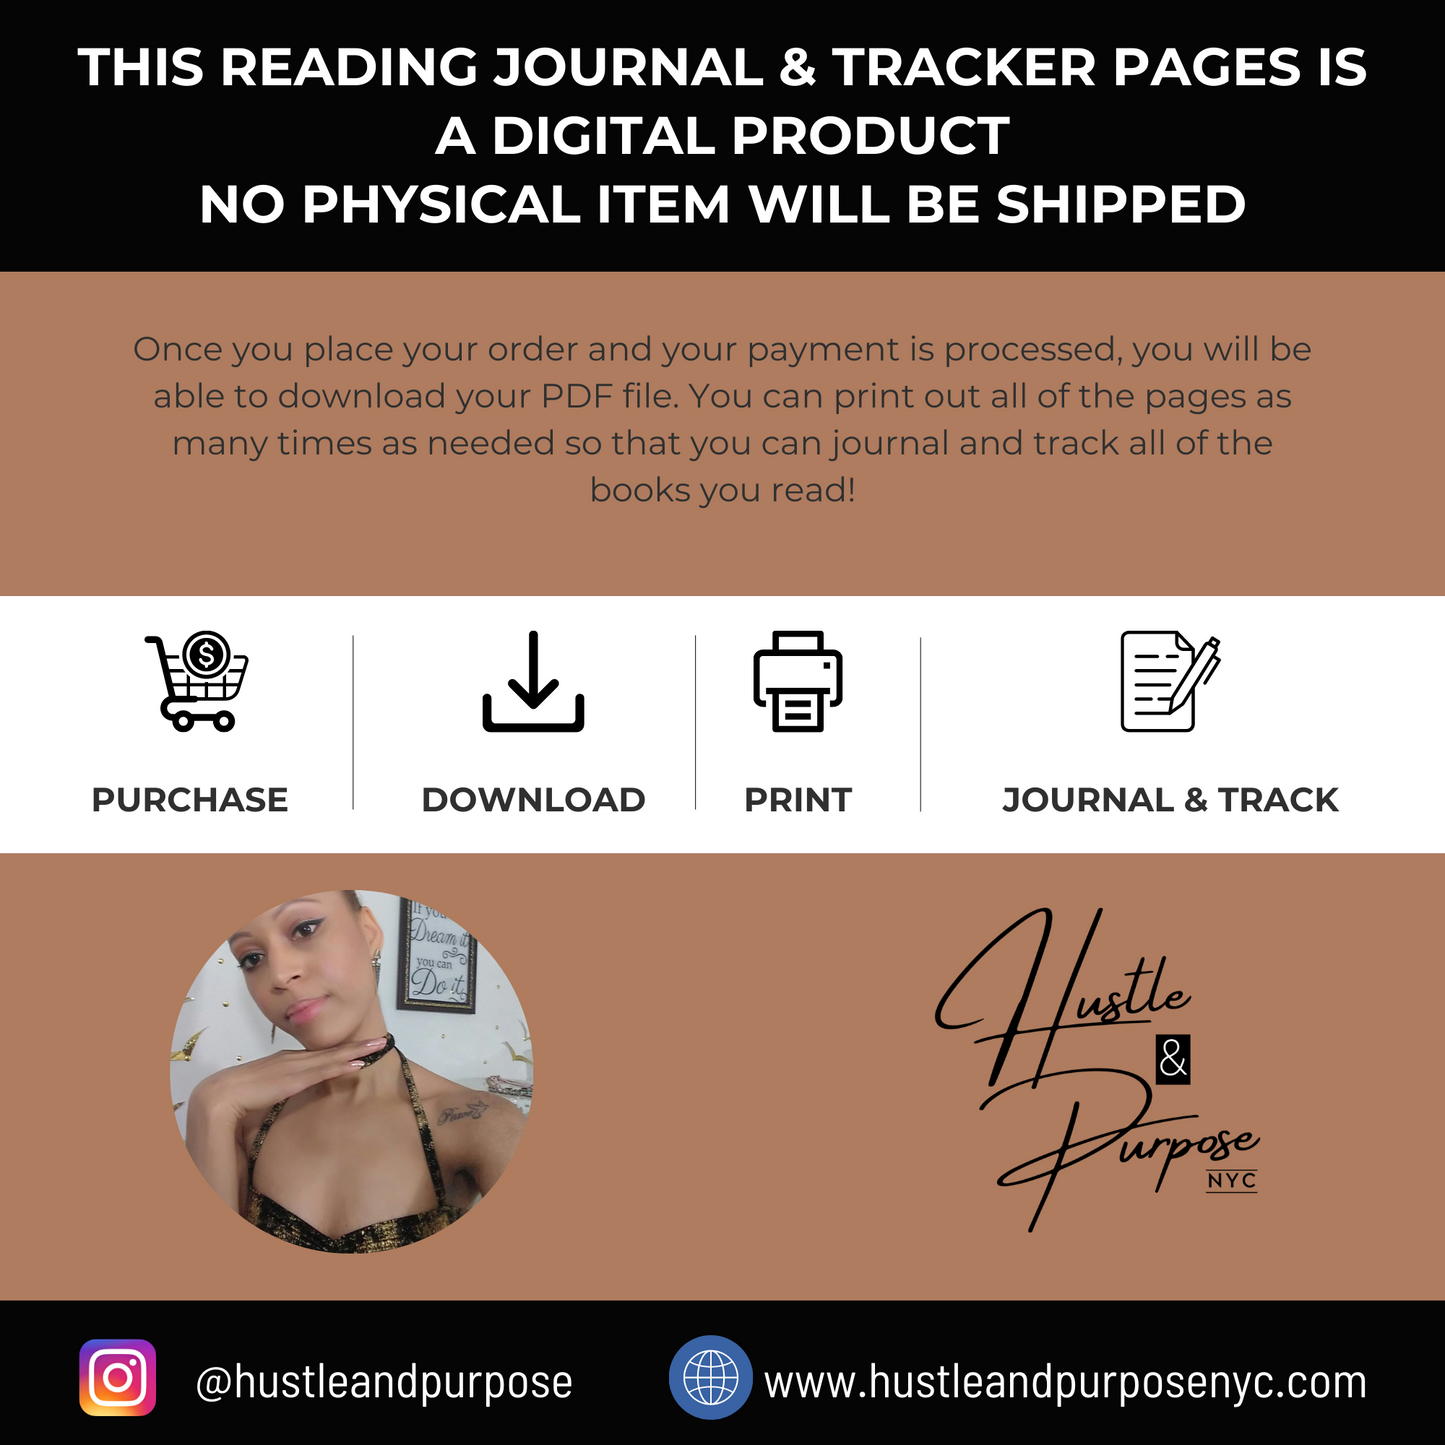 39-Page Reading Journal and Tracker Bundle - Brown Theme